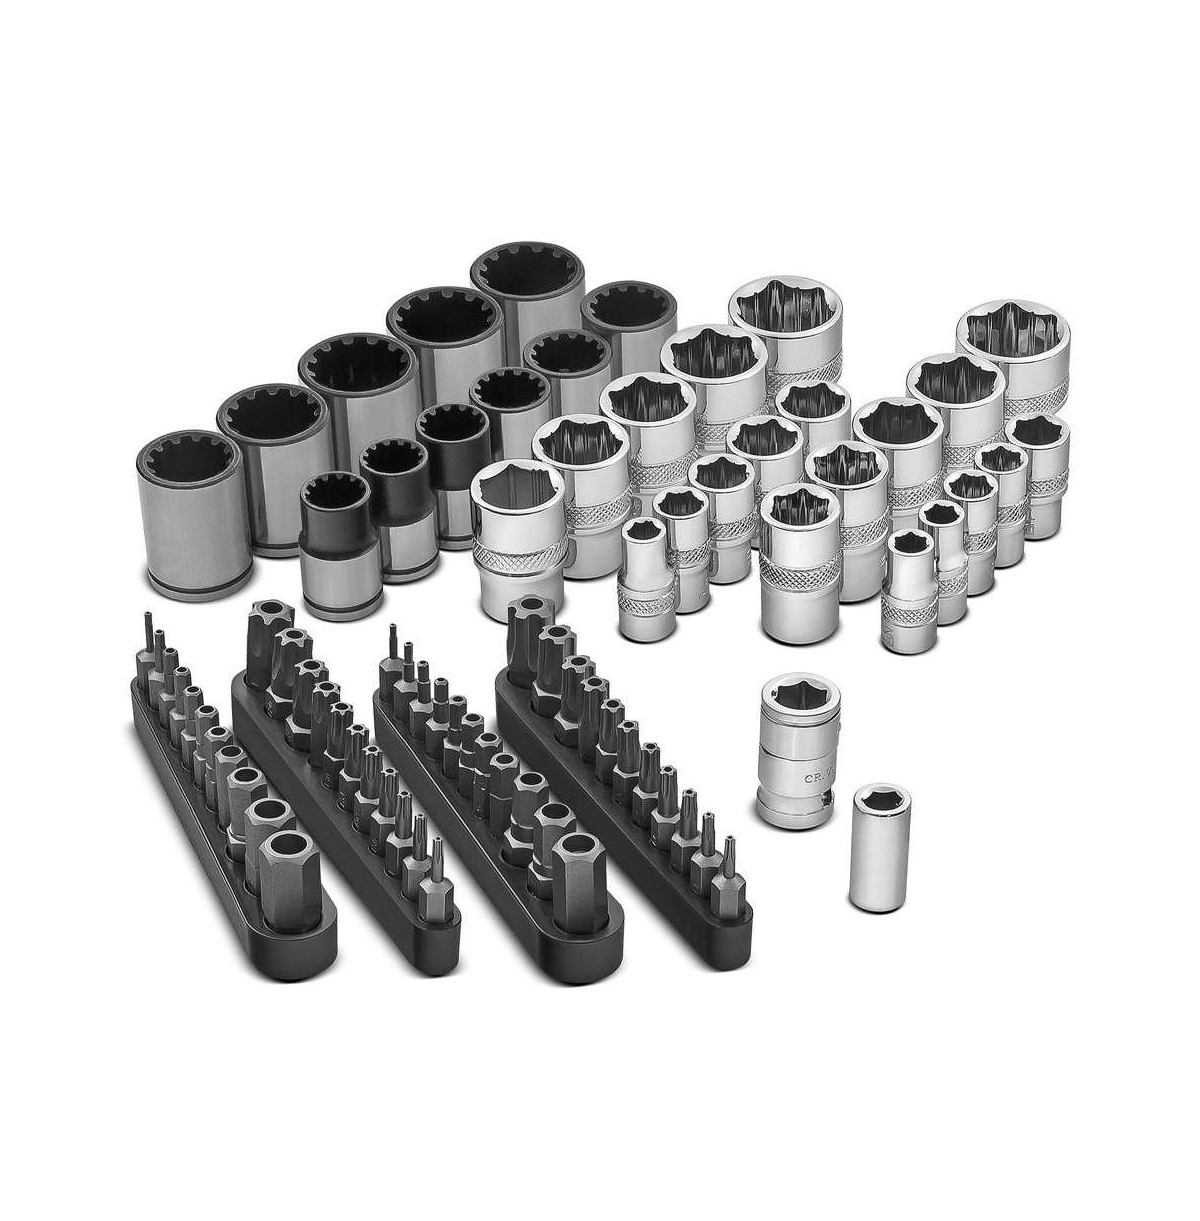 81 Piece Solutions Socket and Bit Set for Specialty and Damaged Fasteners - Silver